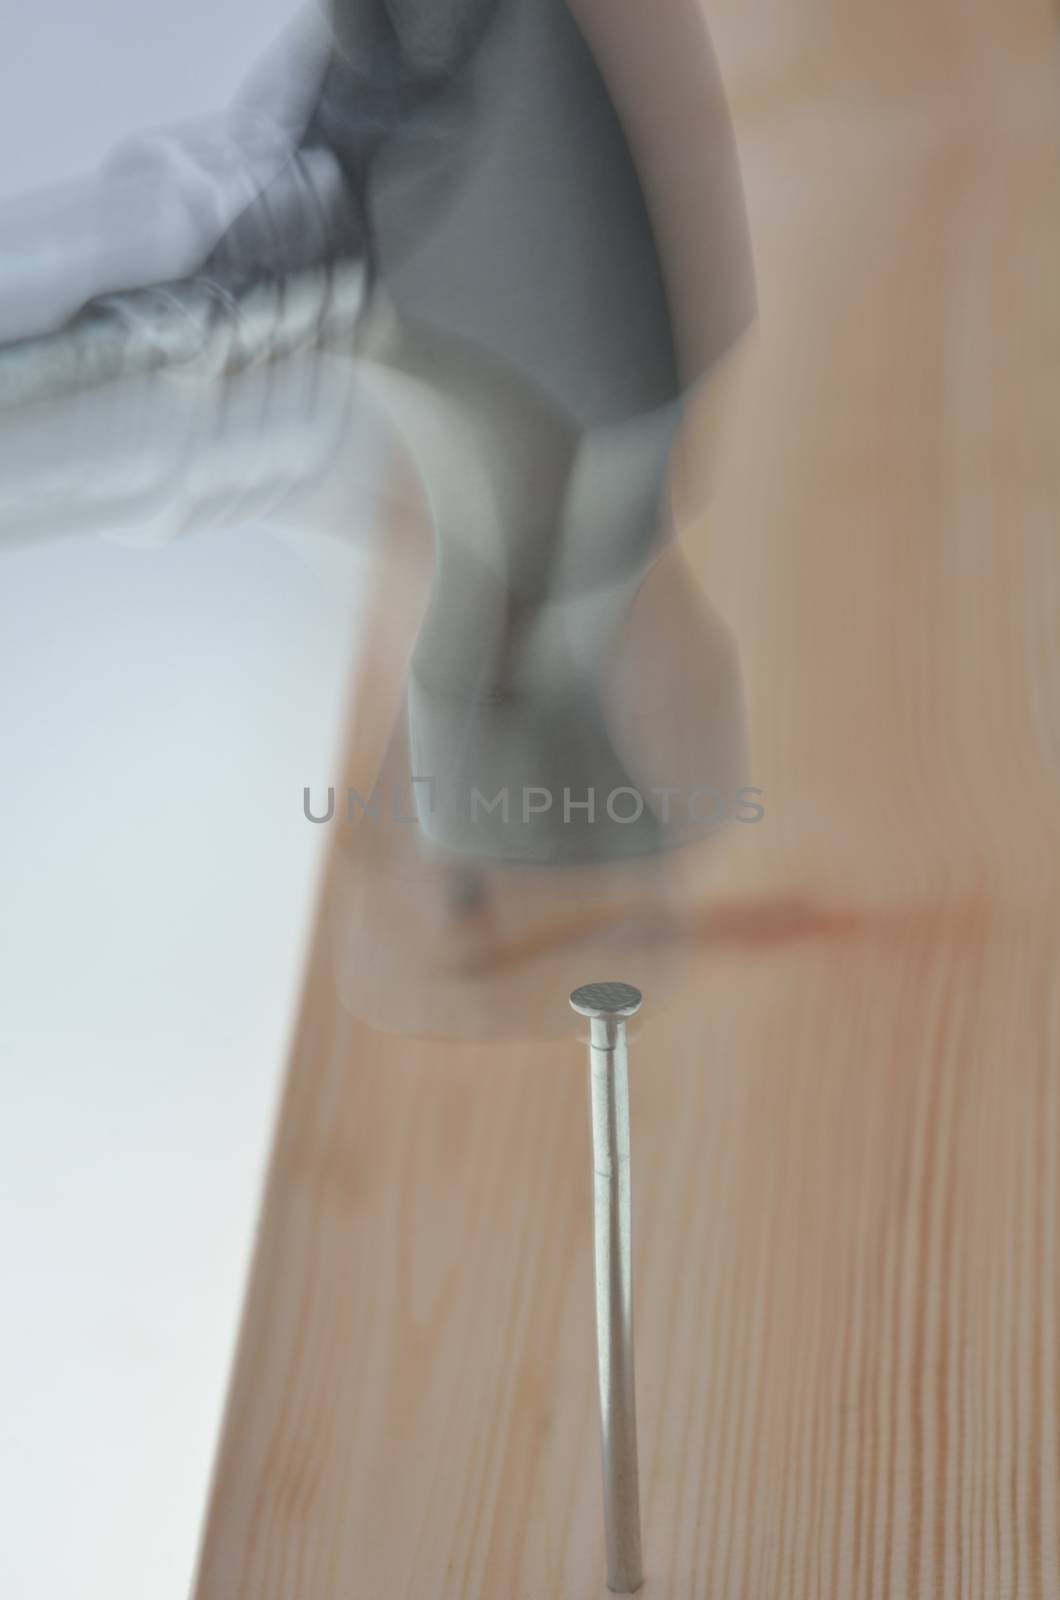 blurred image of nail being hammered into plank